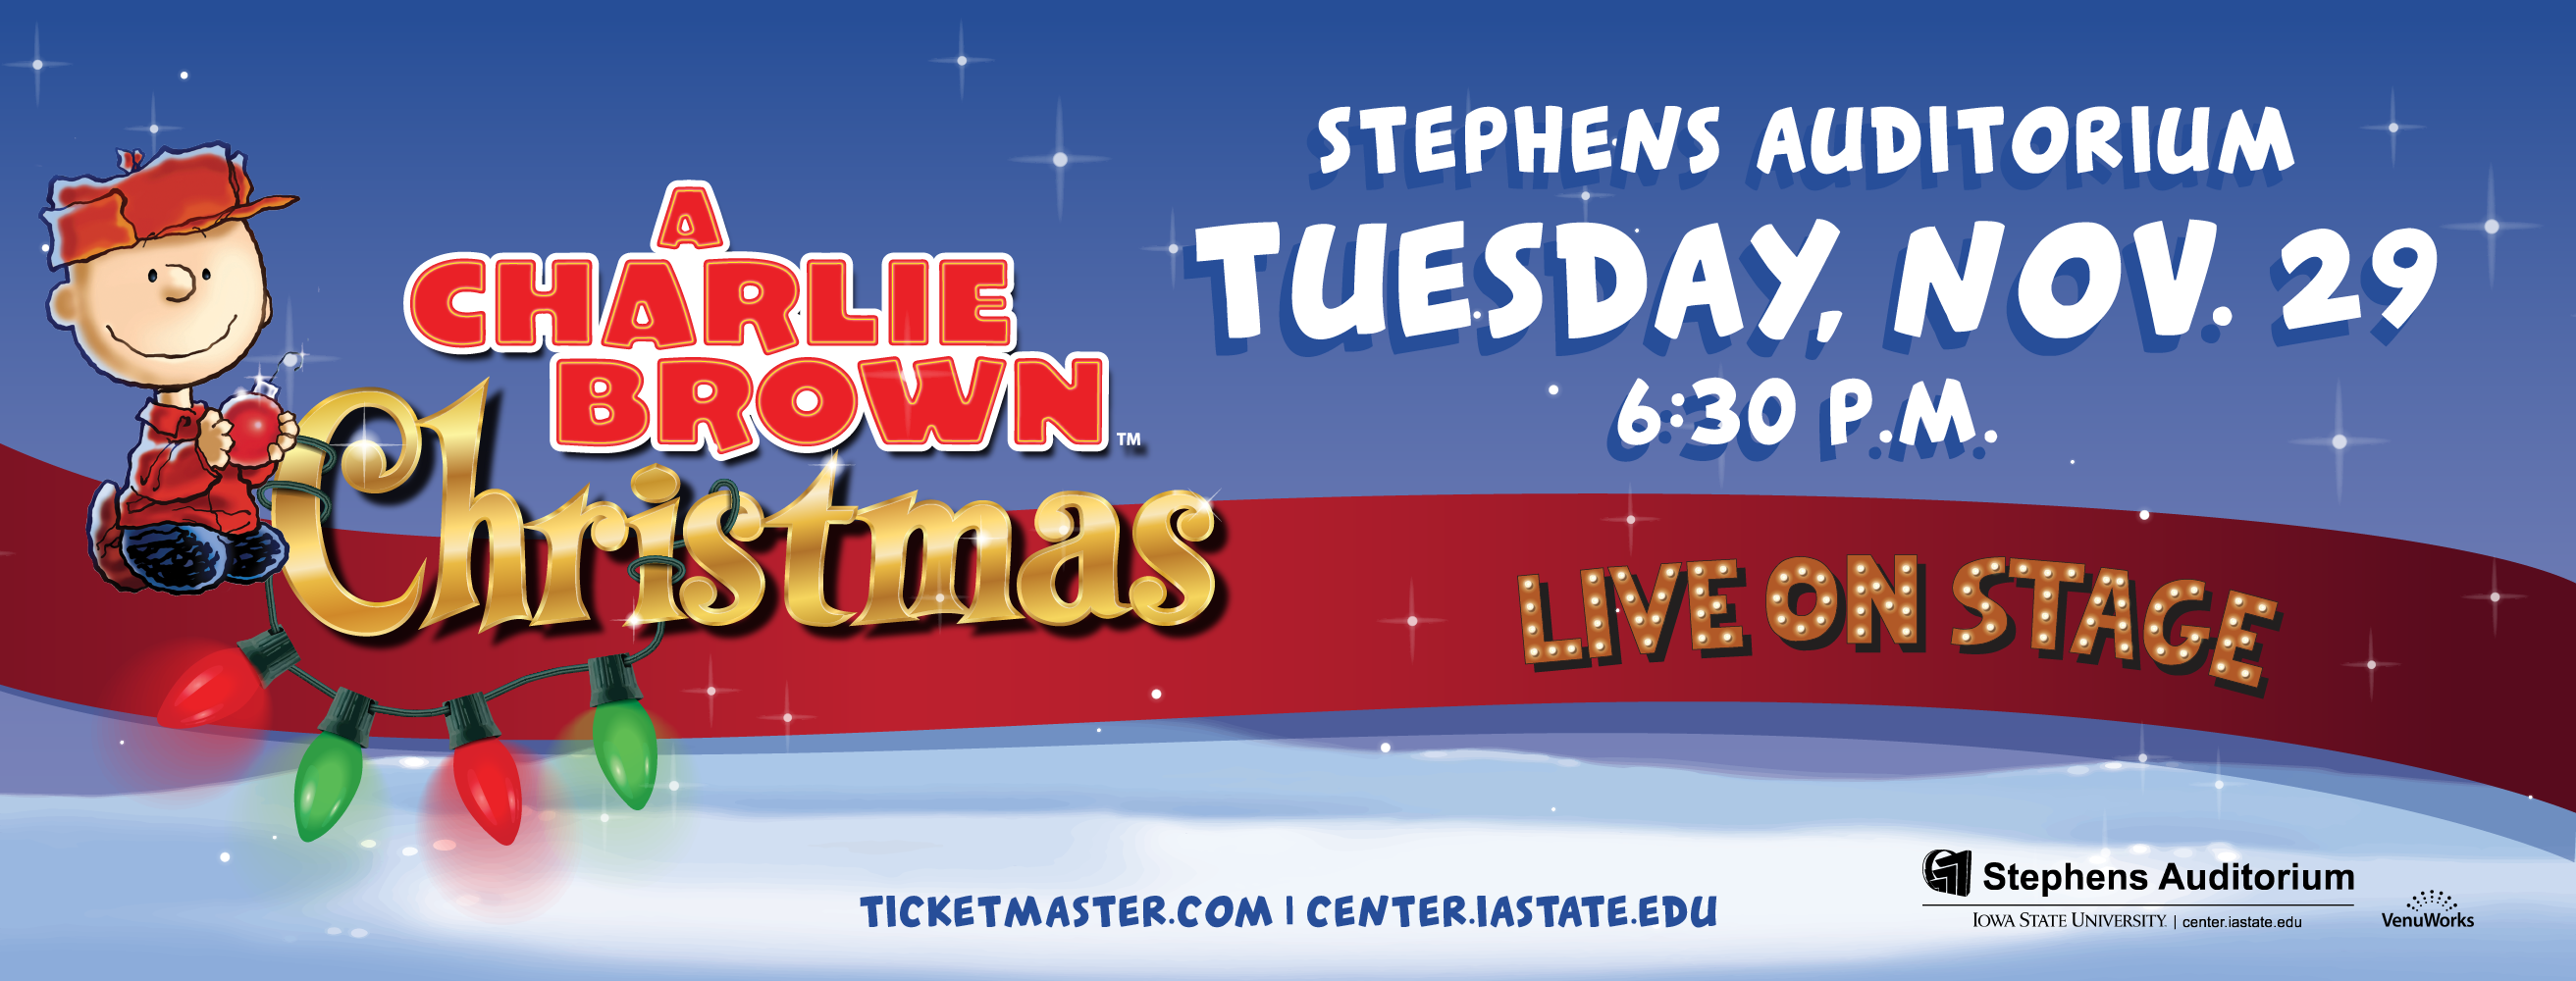 Illustrated image of Charlie Brown in winter gear next to the words A Charlie Brown Christmas, Stephens Auditorium, Tuesday, November 29